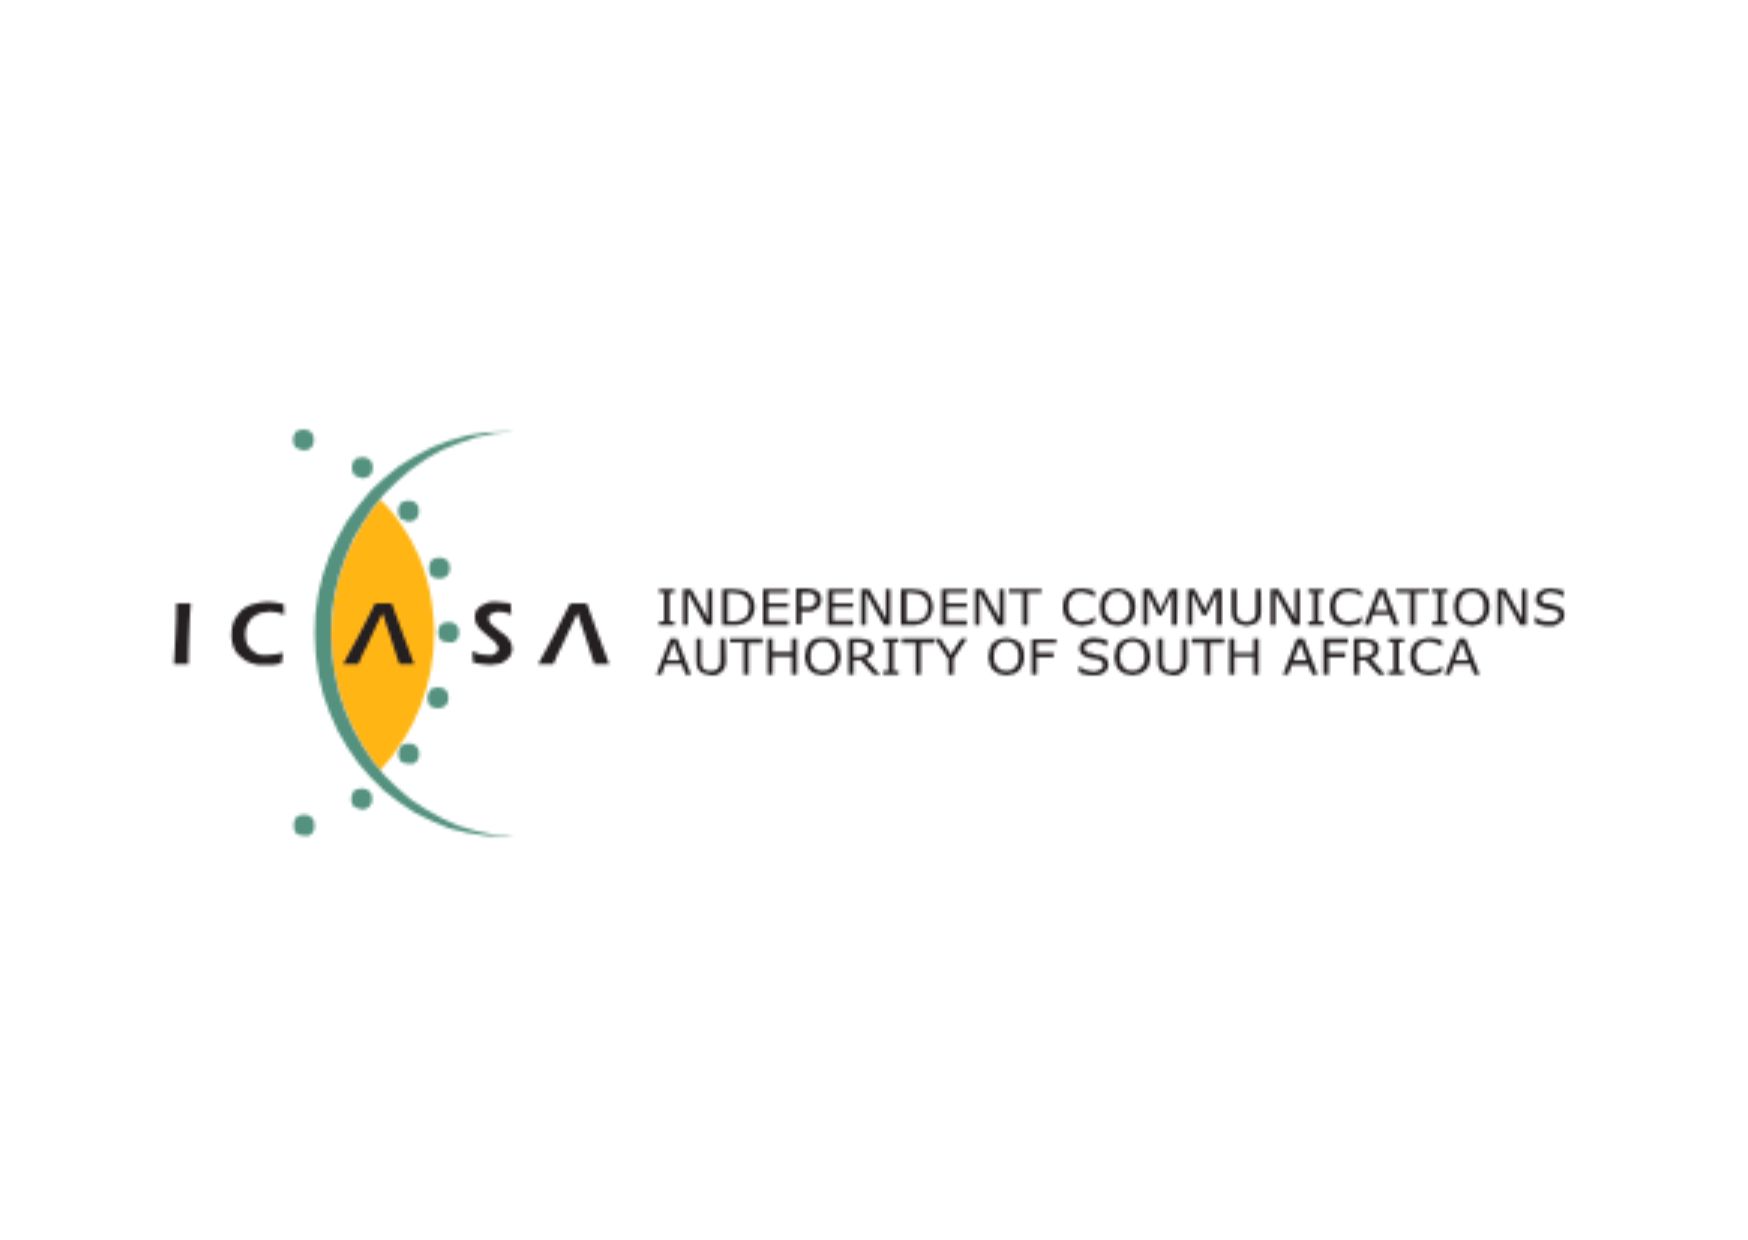 Independent Communications Authority of South Africa (ICASA) Logo